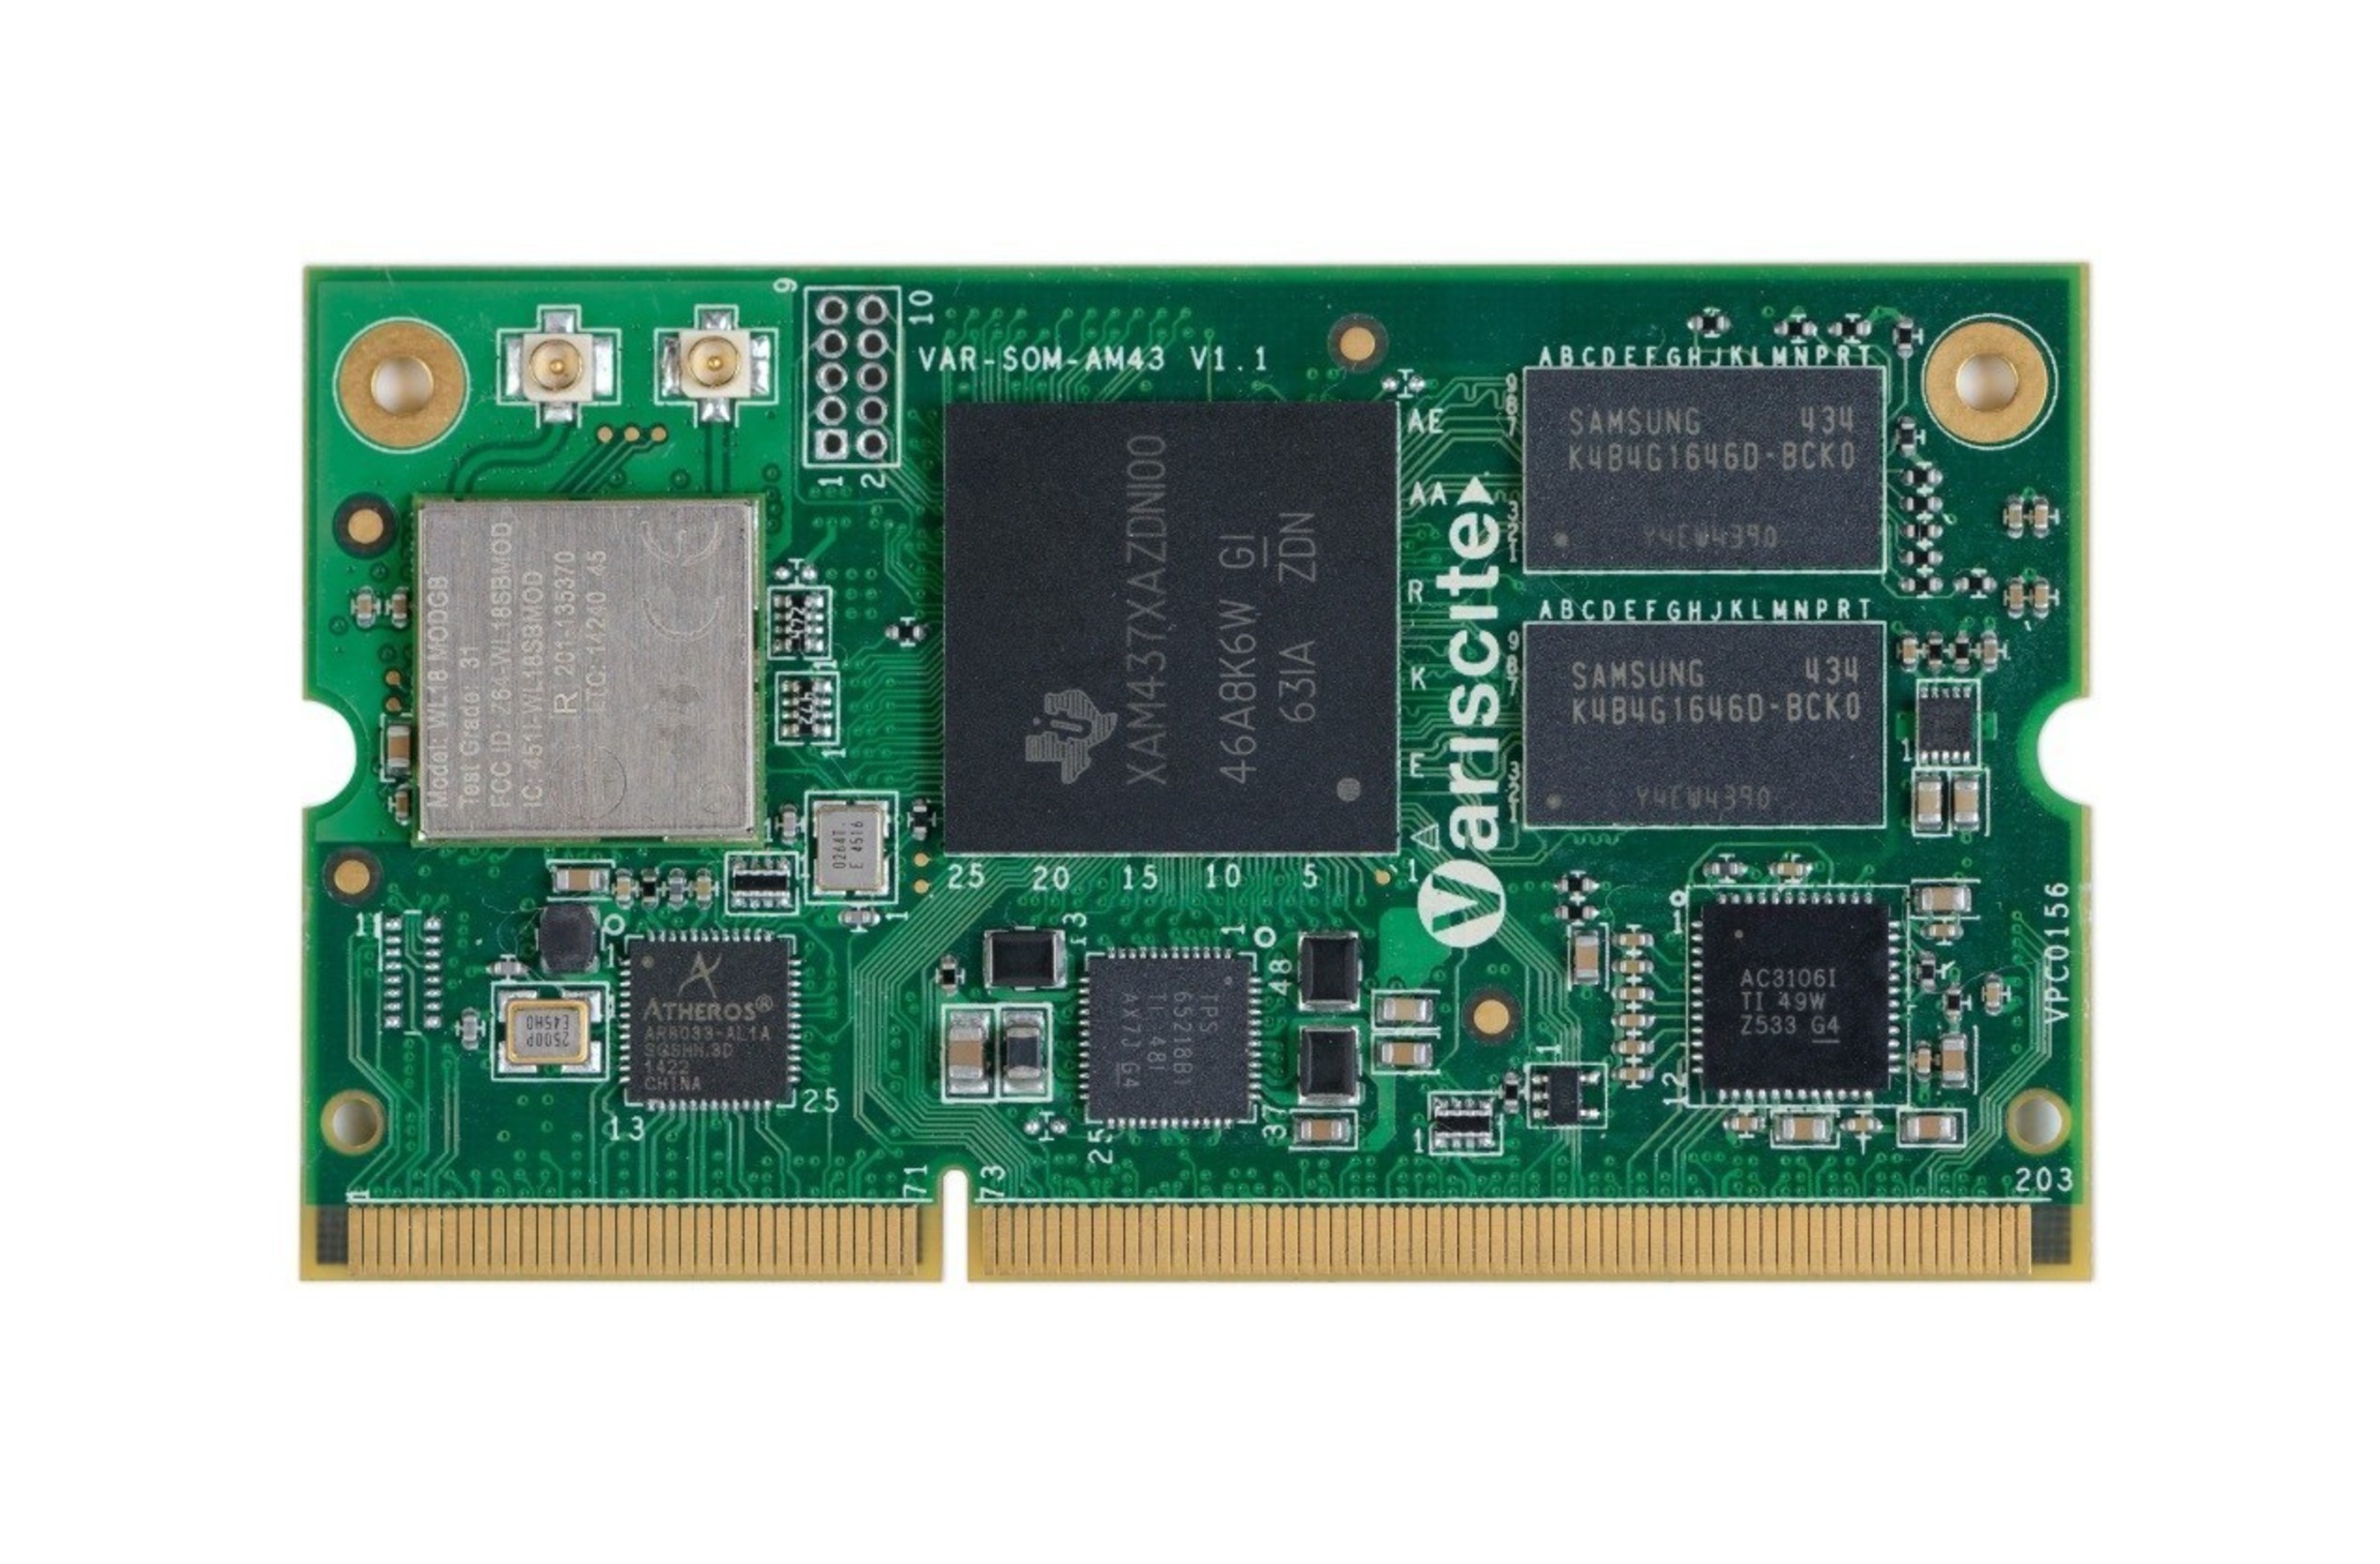 Variscite VAR-SOM-AM43 with TI AM437x 1GHz Cortex-A9 introduces real-time processing and a wide range of industrial connectivity and protocols for the embedded market